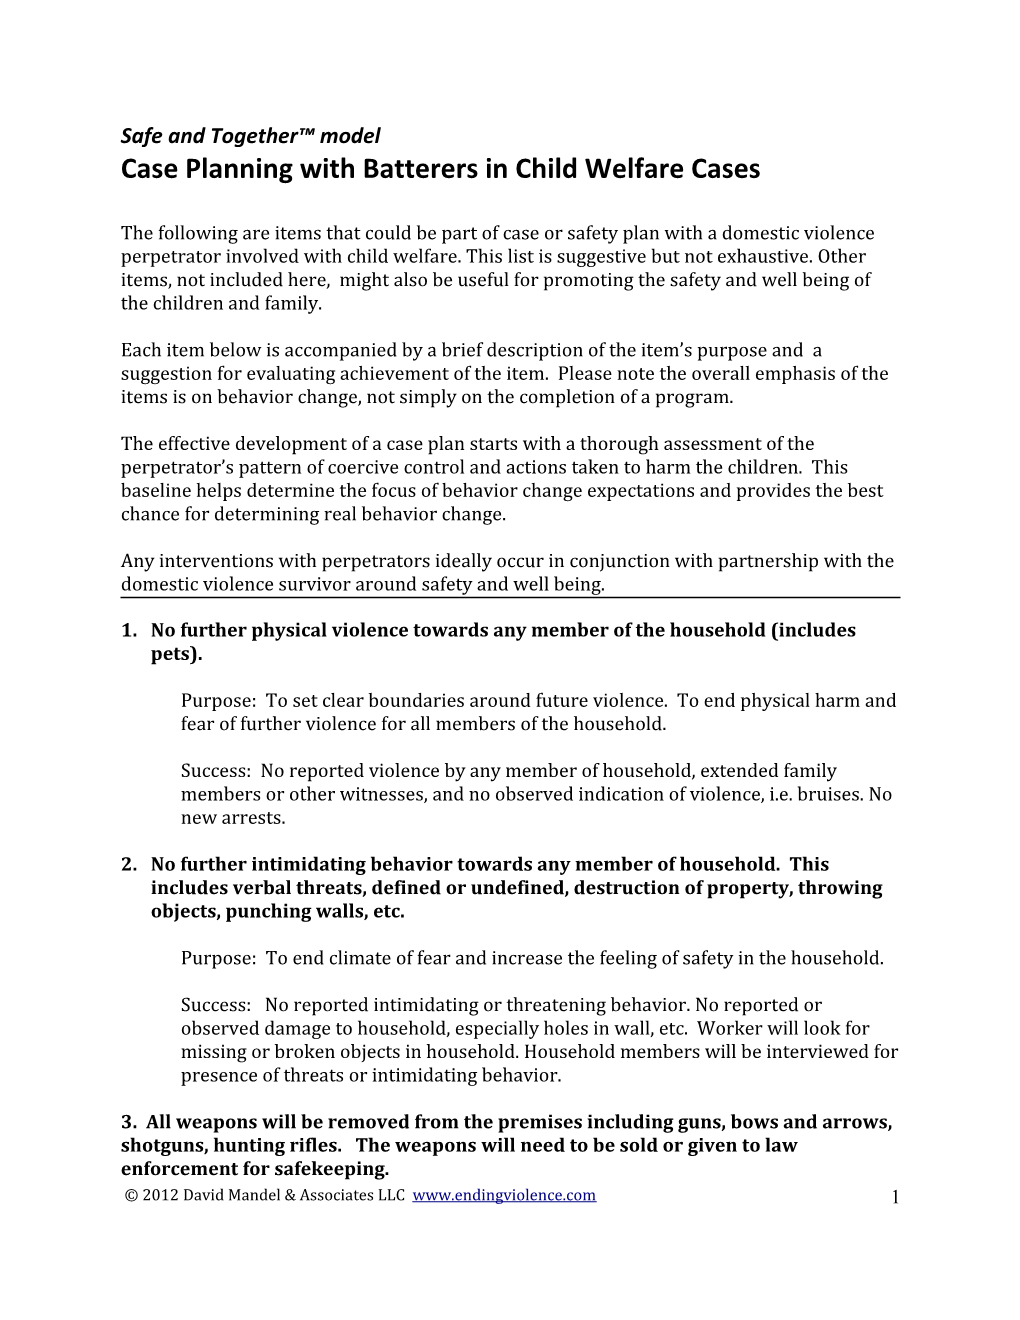 Case Planning with Batterers in Child Welfare Cases